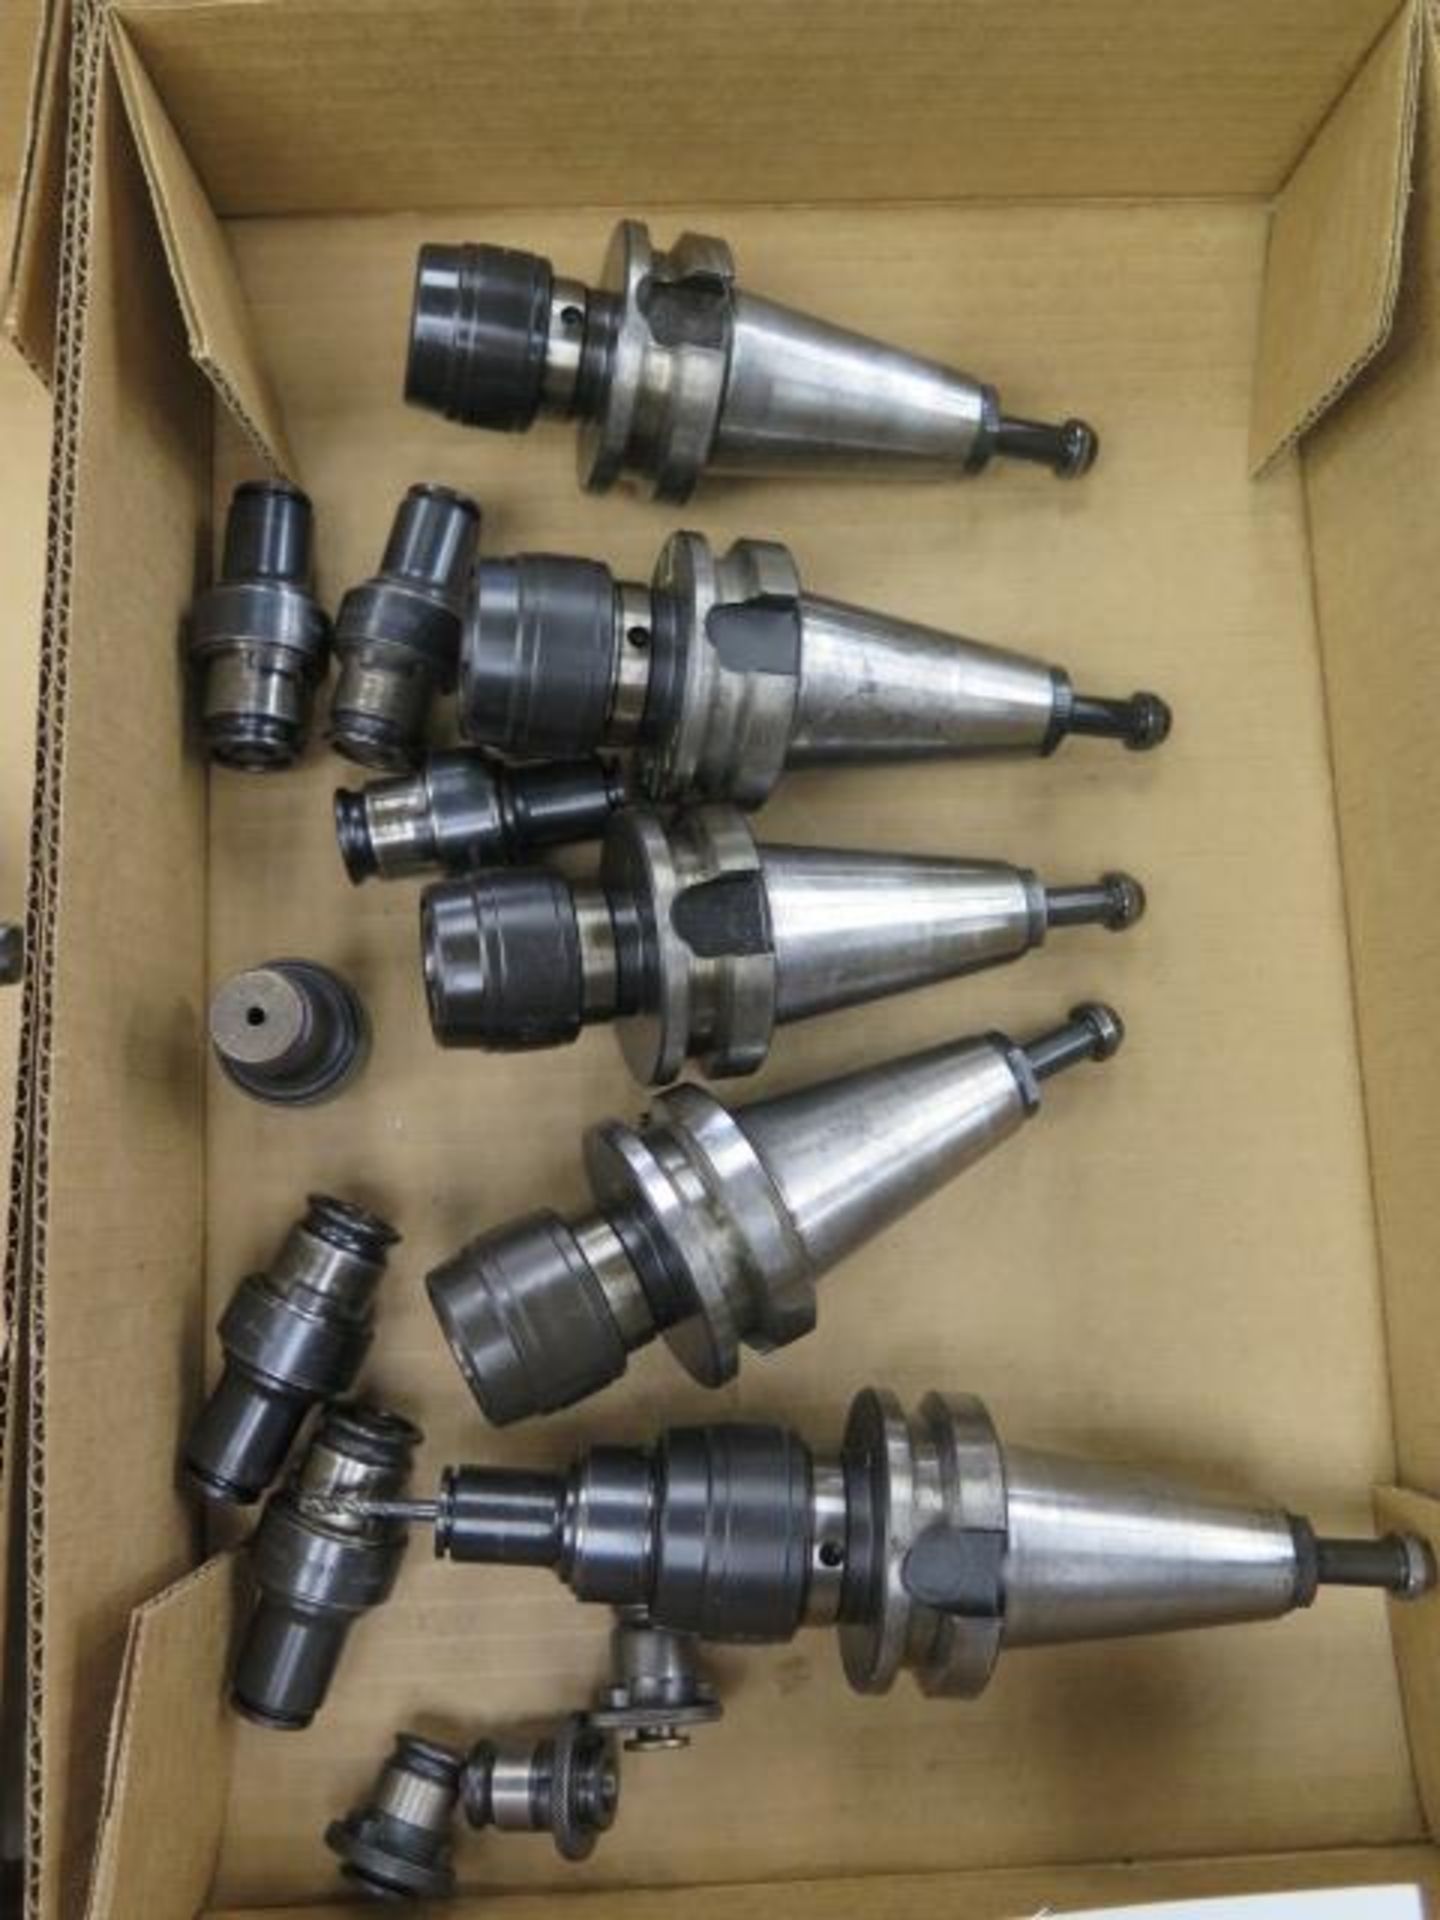 BT-40 Taper Tapping Heads (5) w/ Tap Holders (SOLD AS-IS - NO WARRANTY) - Image 2 of 4